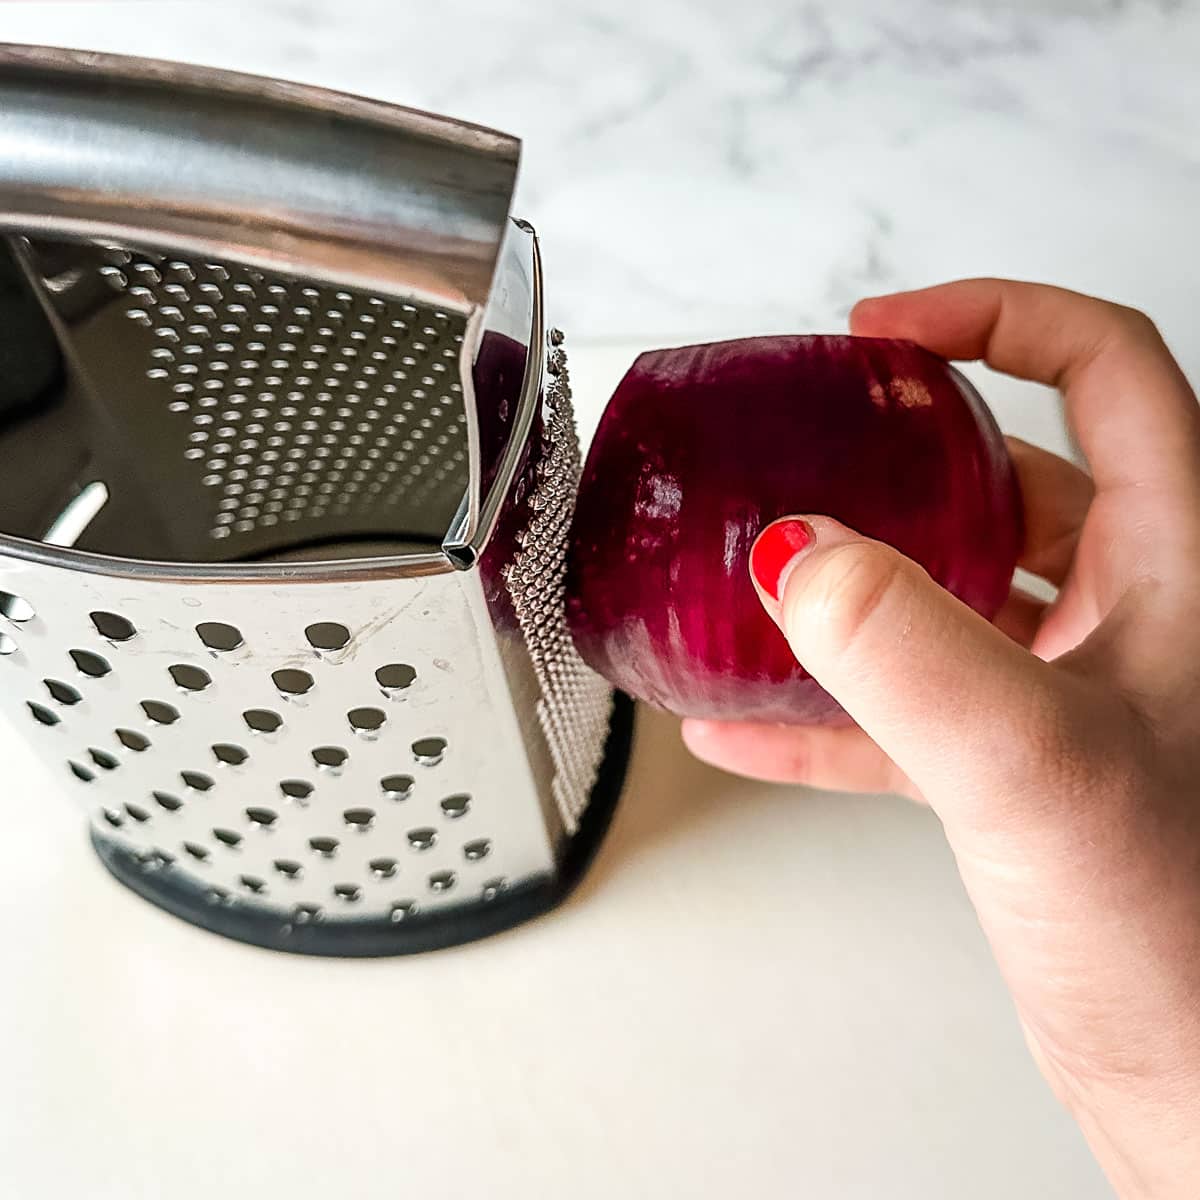 A red onion is grated on a box grater.